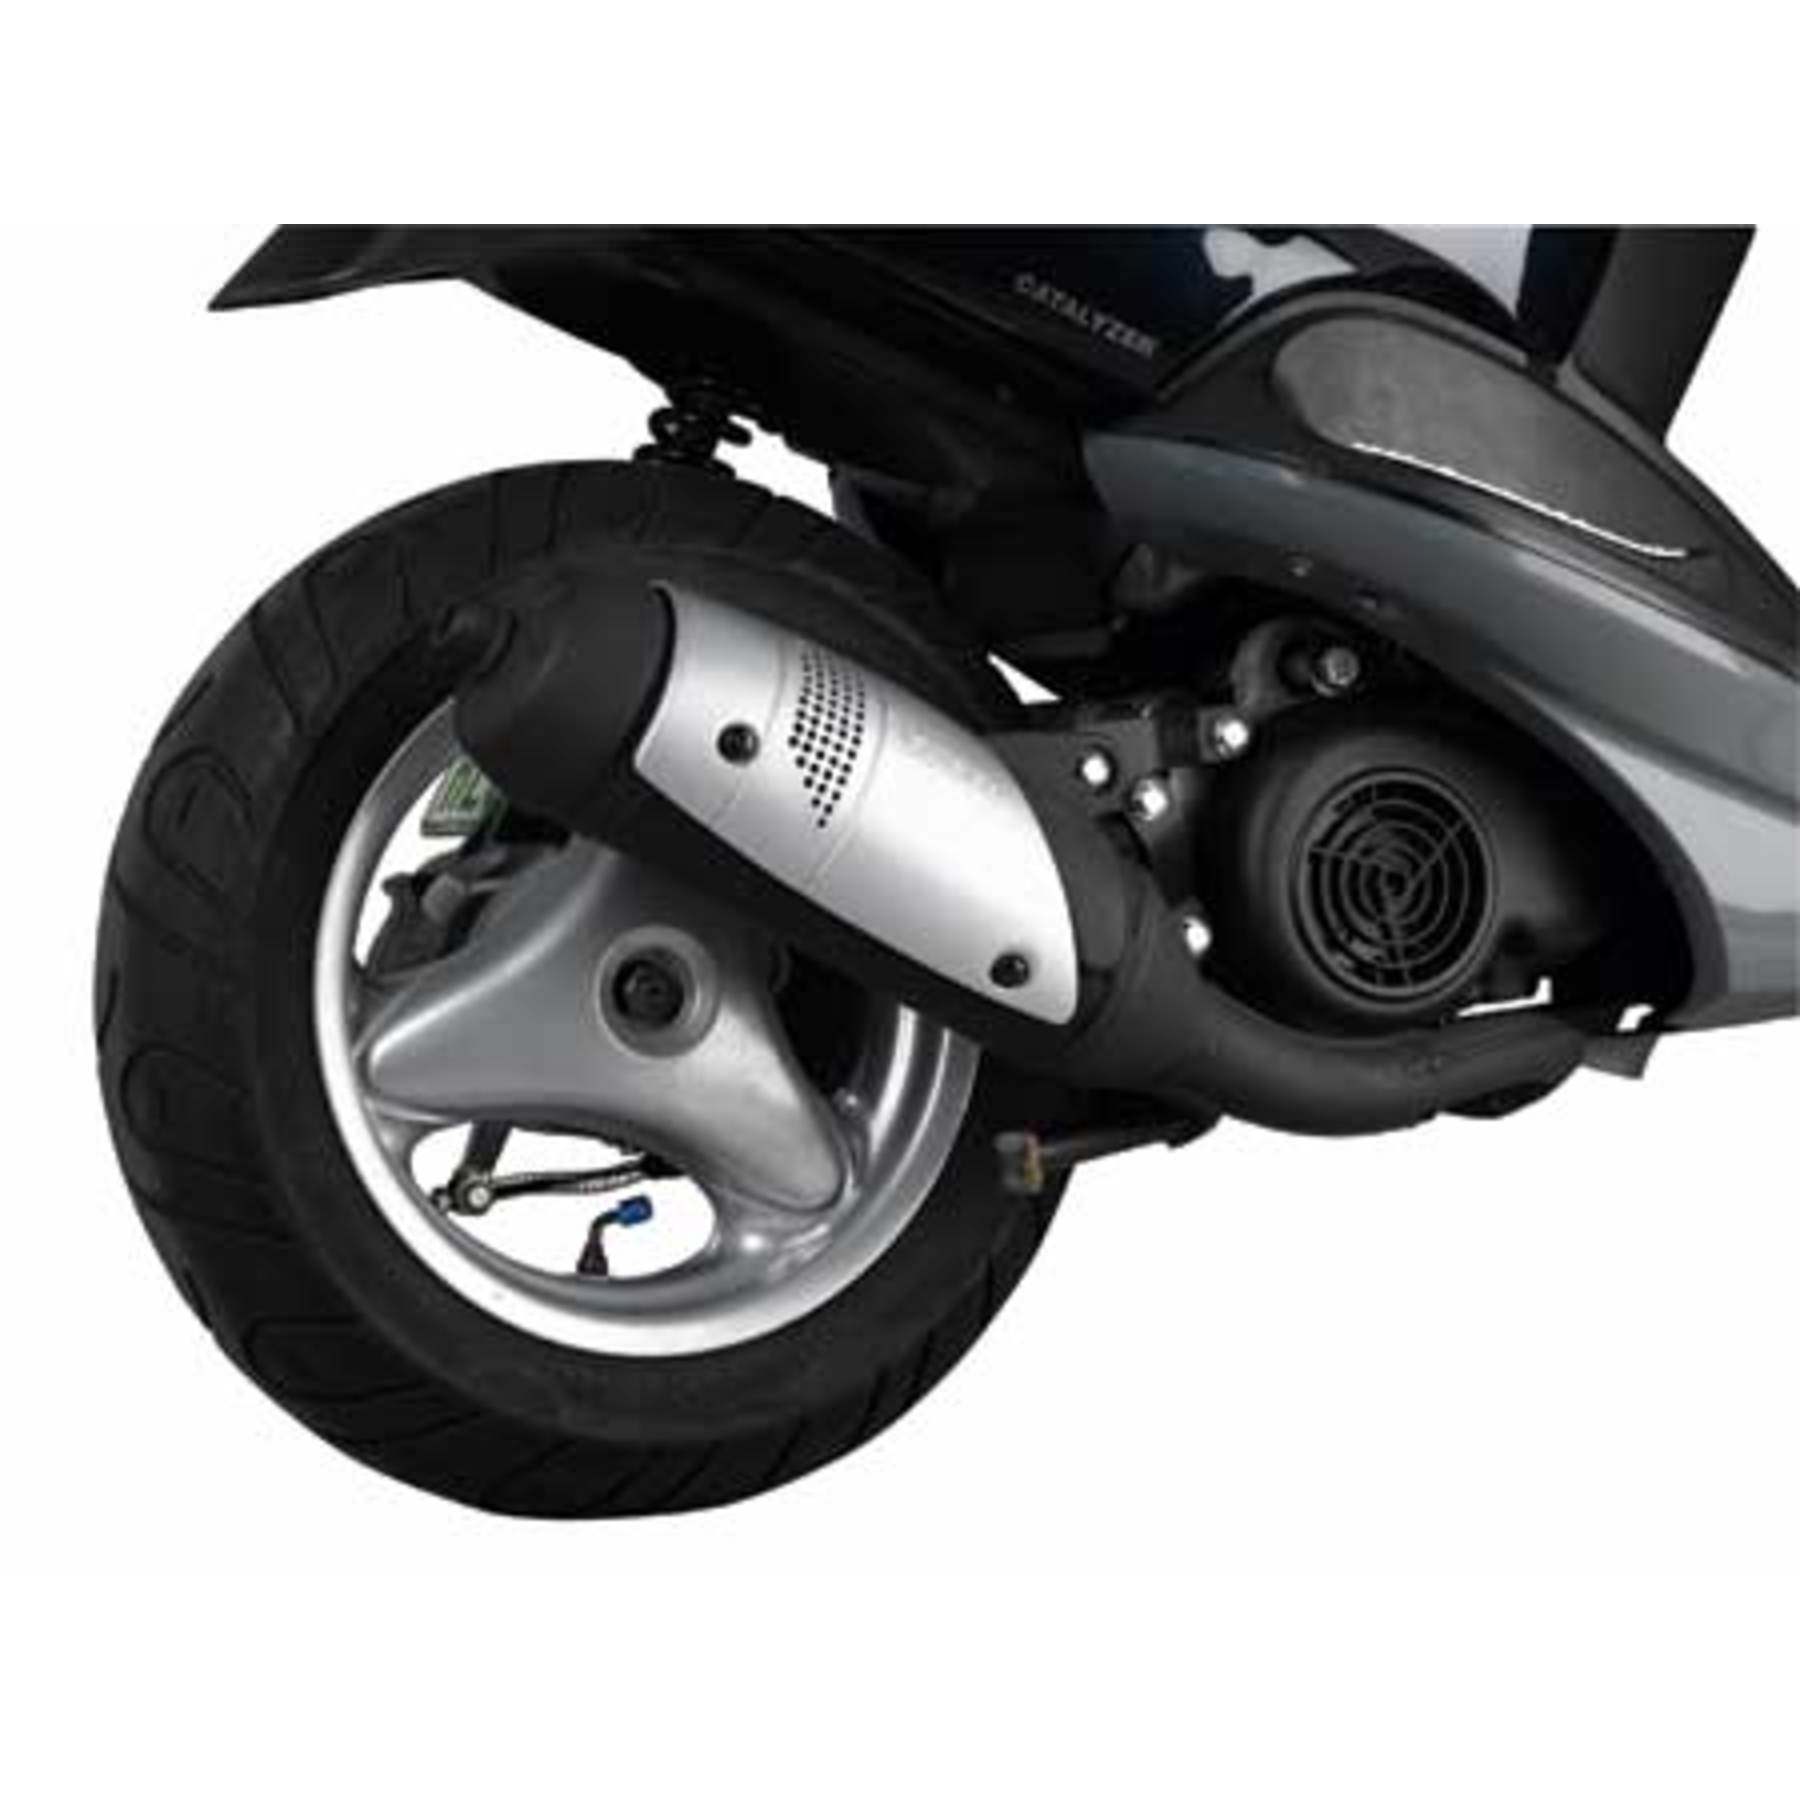 Buy LeoVince Scooter Exhaust Touring | Louis motorcycle clothing and